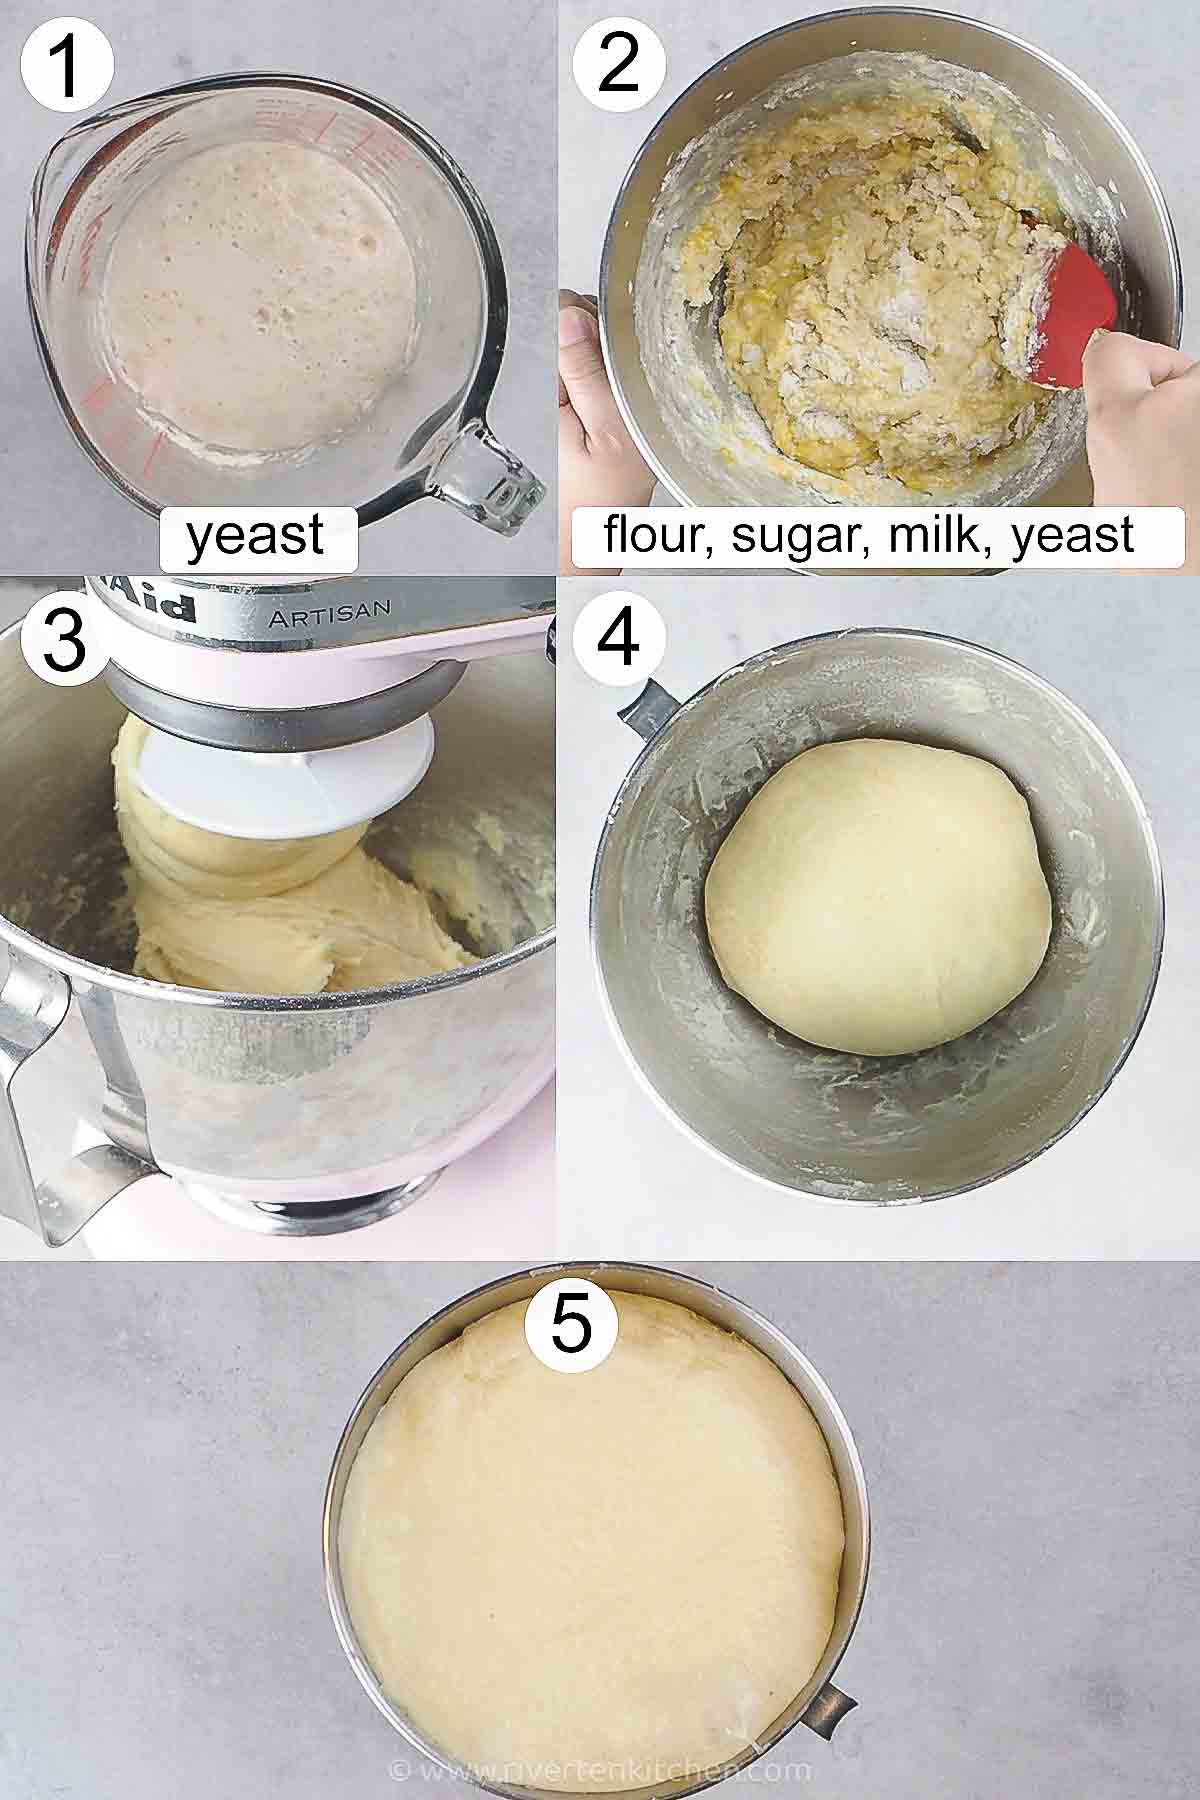 step-by-step process on how to make the dough.